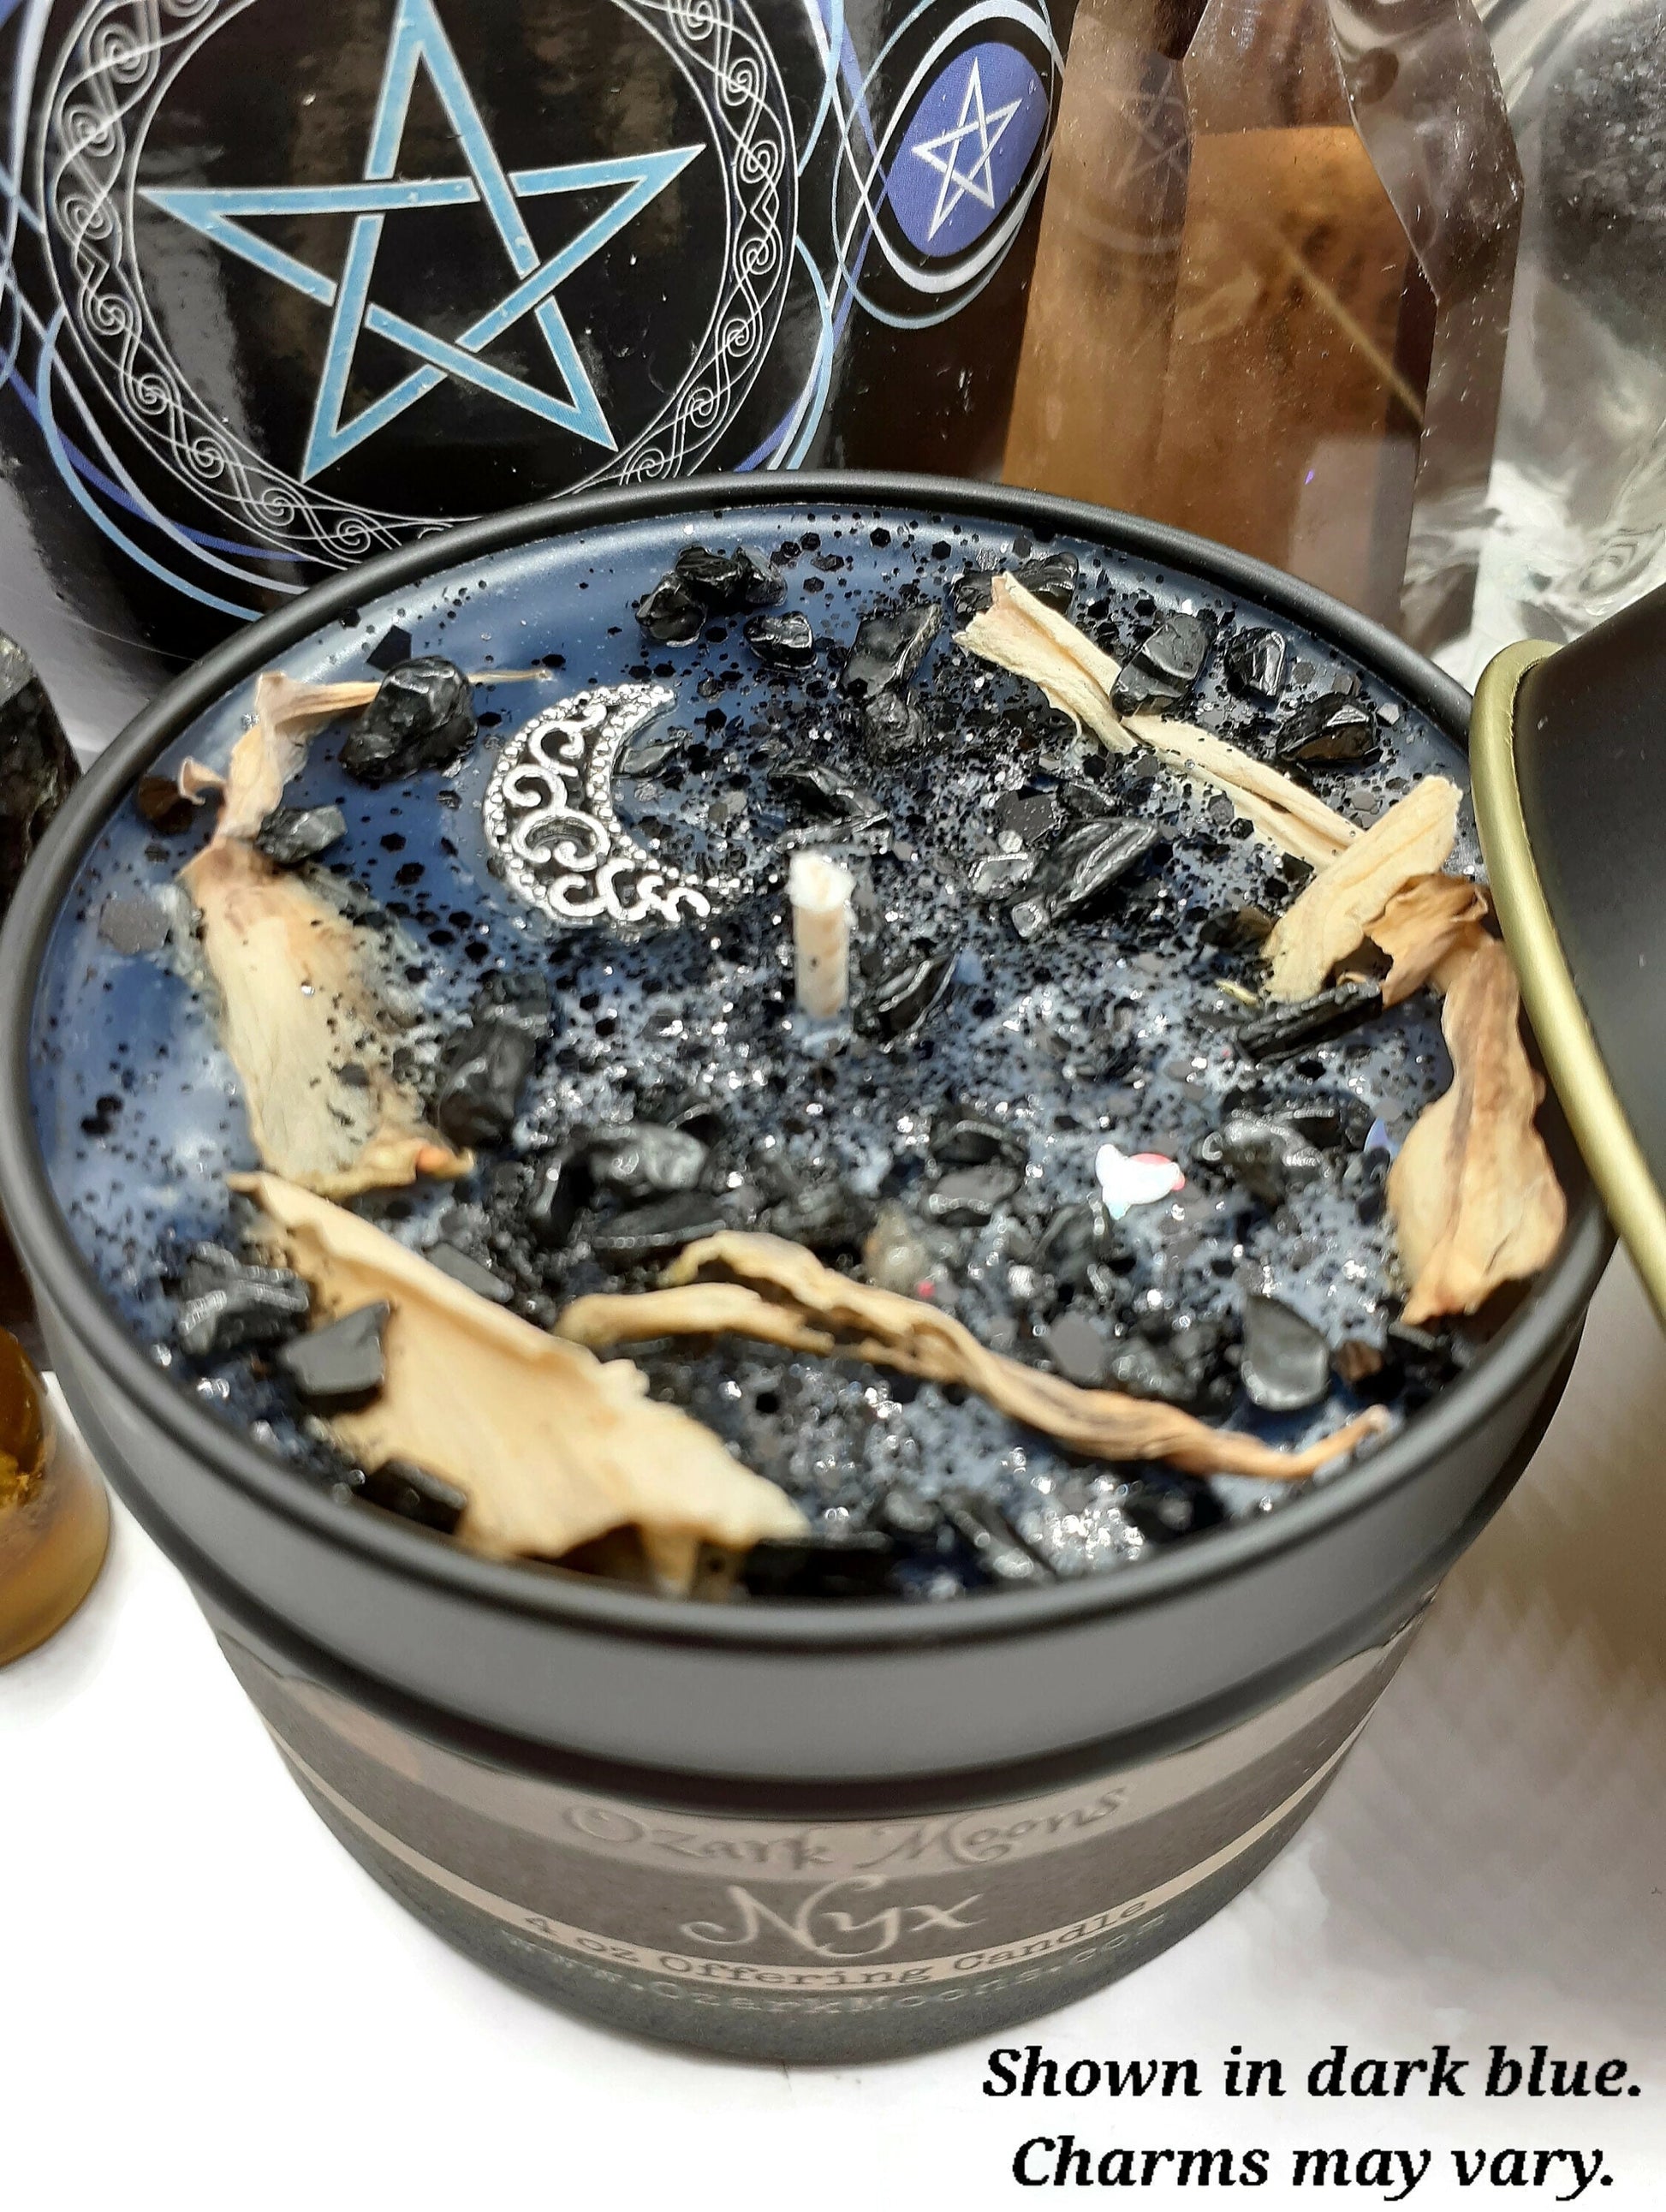 NYX Primordial Goddess of the Night Offering Wax Melts or Candles - Moonflowers and Black Tourmaline - Pagan Wiccan Witch Ritual Candle